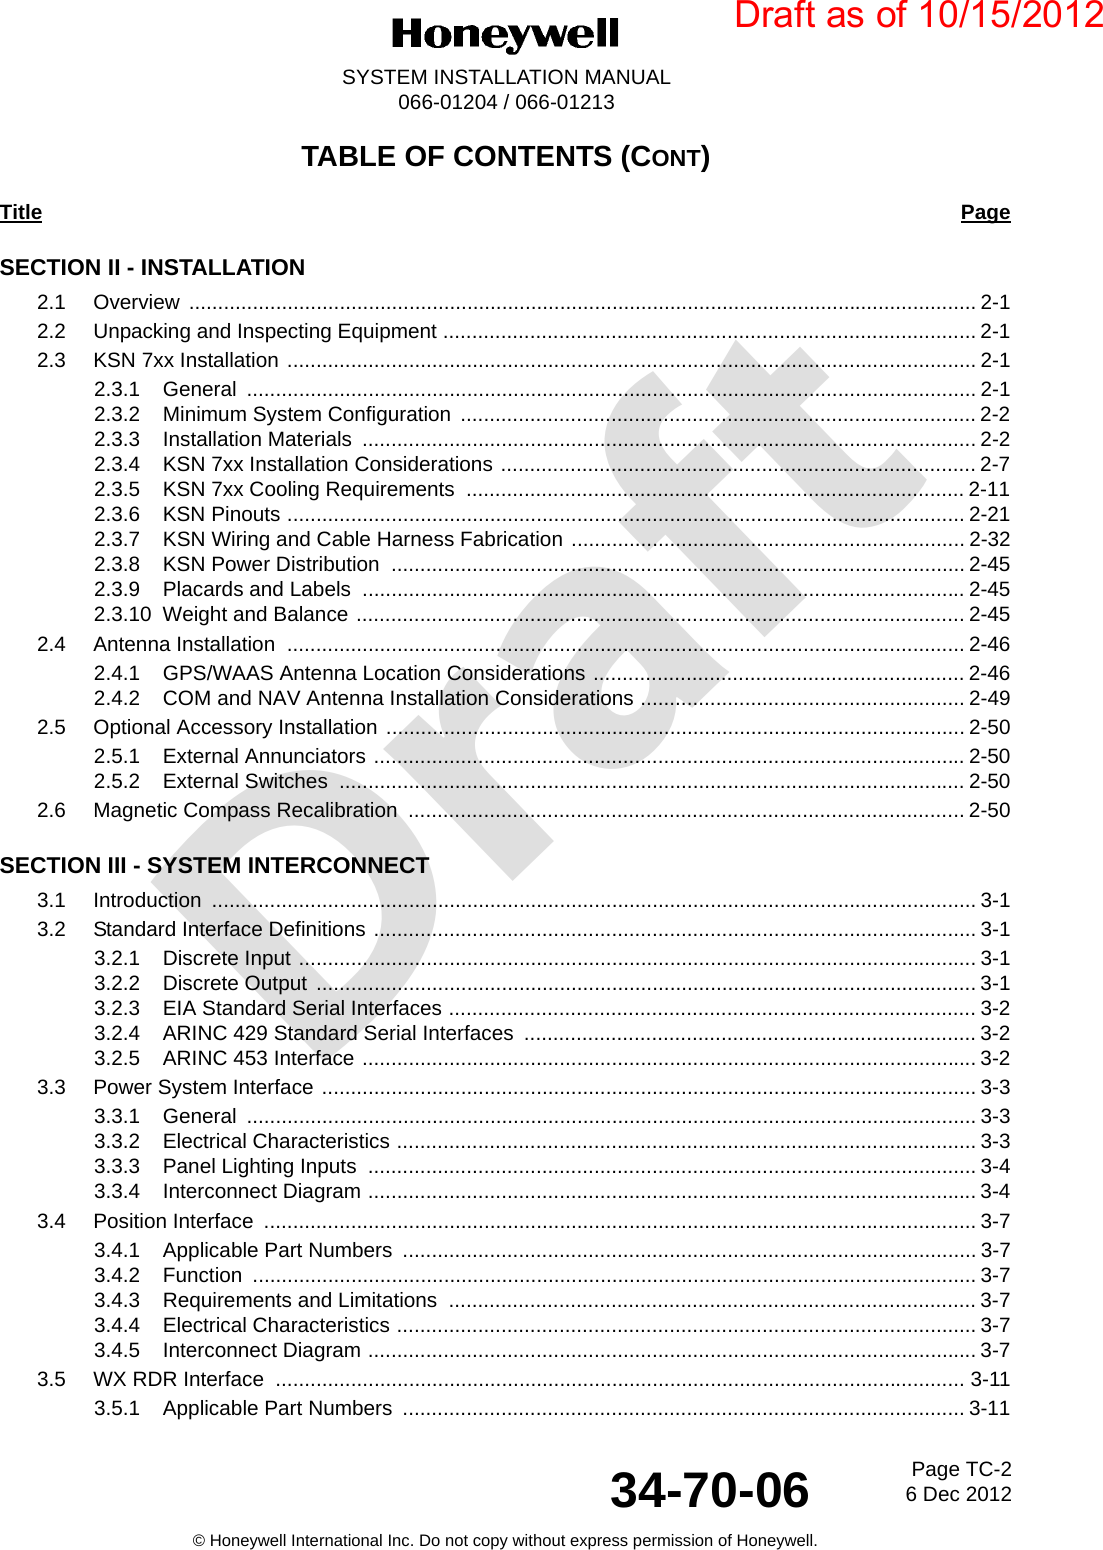 DraftPage TC-26 Dec 201234-70-06SYSTEM INSTALLATION MANUAL066-01204 / 066-01213© Honeywell International Inc. Do not copy without express permission of Honeywell.TABLE OF CONTENTS (CONT)Title PageSECTION II - INSTALLATION2.1 Overview ........................................................................................................................................ 2-12.2 Unpacking and Inspecting Equipment ............................................................................................ 2-12.3 KSN 7xx Installation ....................................................................................................................... 2-12.3.1 General .............................................................................................................................. 2-12.3.2 Minimum System Configuration  ......................................................................................... 2-22.3.3 Installation Materials  .......................................................................................................... 2-22.3.4 KSN 7xx Installation Considerations .................................................................................. 2-72.3.5 KSN 7xx Cooling Requirements  ...................................................................................... 2-112.3.6 KSN Pinouts ..................................................................................................................... 2-212.3.7 KSN Wiring and Cable Harness Fabrication .................................................................... 2-322.3.8 KSN Power Distribution  ................................................................................................... 2-452.3.9 Placards and Labels  ........................................................................................................ 2-452.3.10 Weight and Balance ......................................................................................................... 2-452.4 Antenna Installation  ..................................................................................................................... 2-462.4.1 GPS/WAAS Antenna Location Considerations ................................................................ 2-462.4.2 COM and NAV Antenna Installation Considerations ........................................................ 2-492.5 Optional Accessory Installation .................................................................................................... 2-502.5.1 External Annunciators ...................................................................................................... 2-502.5.2 External Switches  ............................................................................................................ 2-502.6 Magnetic Compass Recalibration  ................................................................................................ 2-50SECTION III - SYSTEM INTERCONNECT3.1 Introduction .................................................................................................................................... 3-13.2 Standard Interface Definitions ........................................................................................................ 3-13.2.1 Discrete Input ..................................................................................................................... 3-13.2.2 Discrete Output  .................................................................................................................. 3-13.2.3 EIA Standard Serial Interfaces ........................................................................................... 3-23.2.4 ARINC 429 Standard Serial Interfaces  .............................................................................. 3-23.2.5 ARINC 453 Interface .......................................................................................................... 3-23.3 Power System Interface ................................................................................................................. 3-33.3.1 General .............................................................................................................................. 3-33.3.2 Electrical Characteristics .................................................................................................... 3-33.3.3 Panel Lighting Inputs  ......................................................................................................... 3-43.3.4 Interconnect Diagram ......................................................................................................... 3-43.4 Position Interface  ........................................................................................................................... 3-73.4.1 Applicable Part Numbers  ...................................................................................................3-73.4.2 Function ............................................................................................................................. 3-73.4.3 Requirements and Limitations  ........................................................................................... 3-73.4.4 Electrical Characteristics .................................................................................................... 3-73.4.5 Interconnect Diagram ......................................................................................................... 3-73.5 WX RDR Interface  ....................................................................................................................... 3-113.5.1 Applicable Part Numbers  ................................................................................................. 3-11Draft as of 10/15/2012